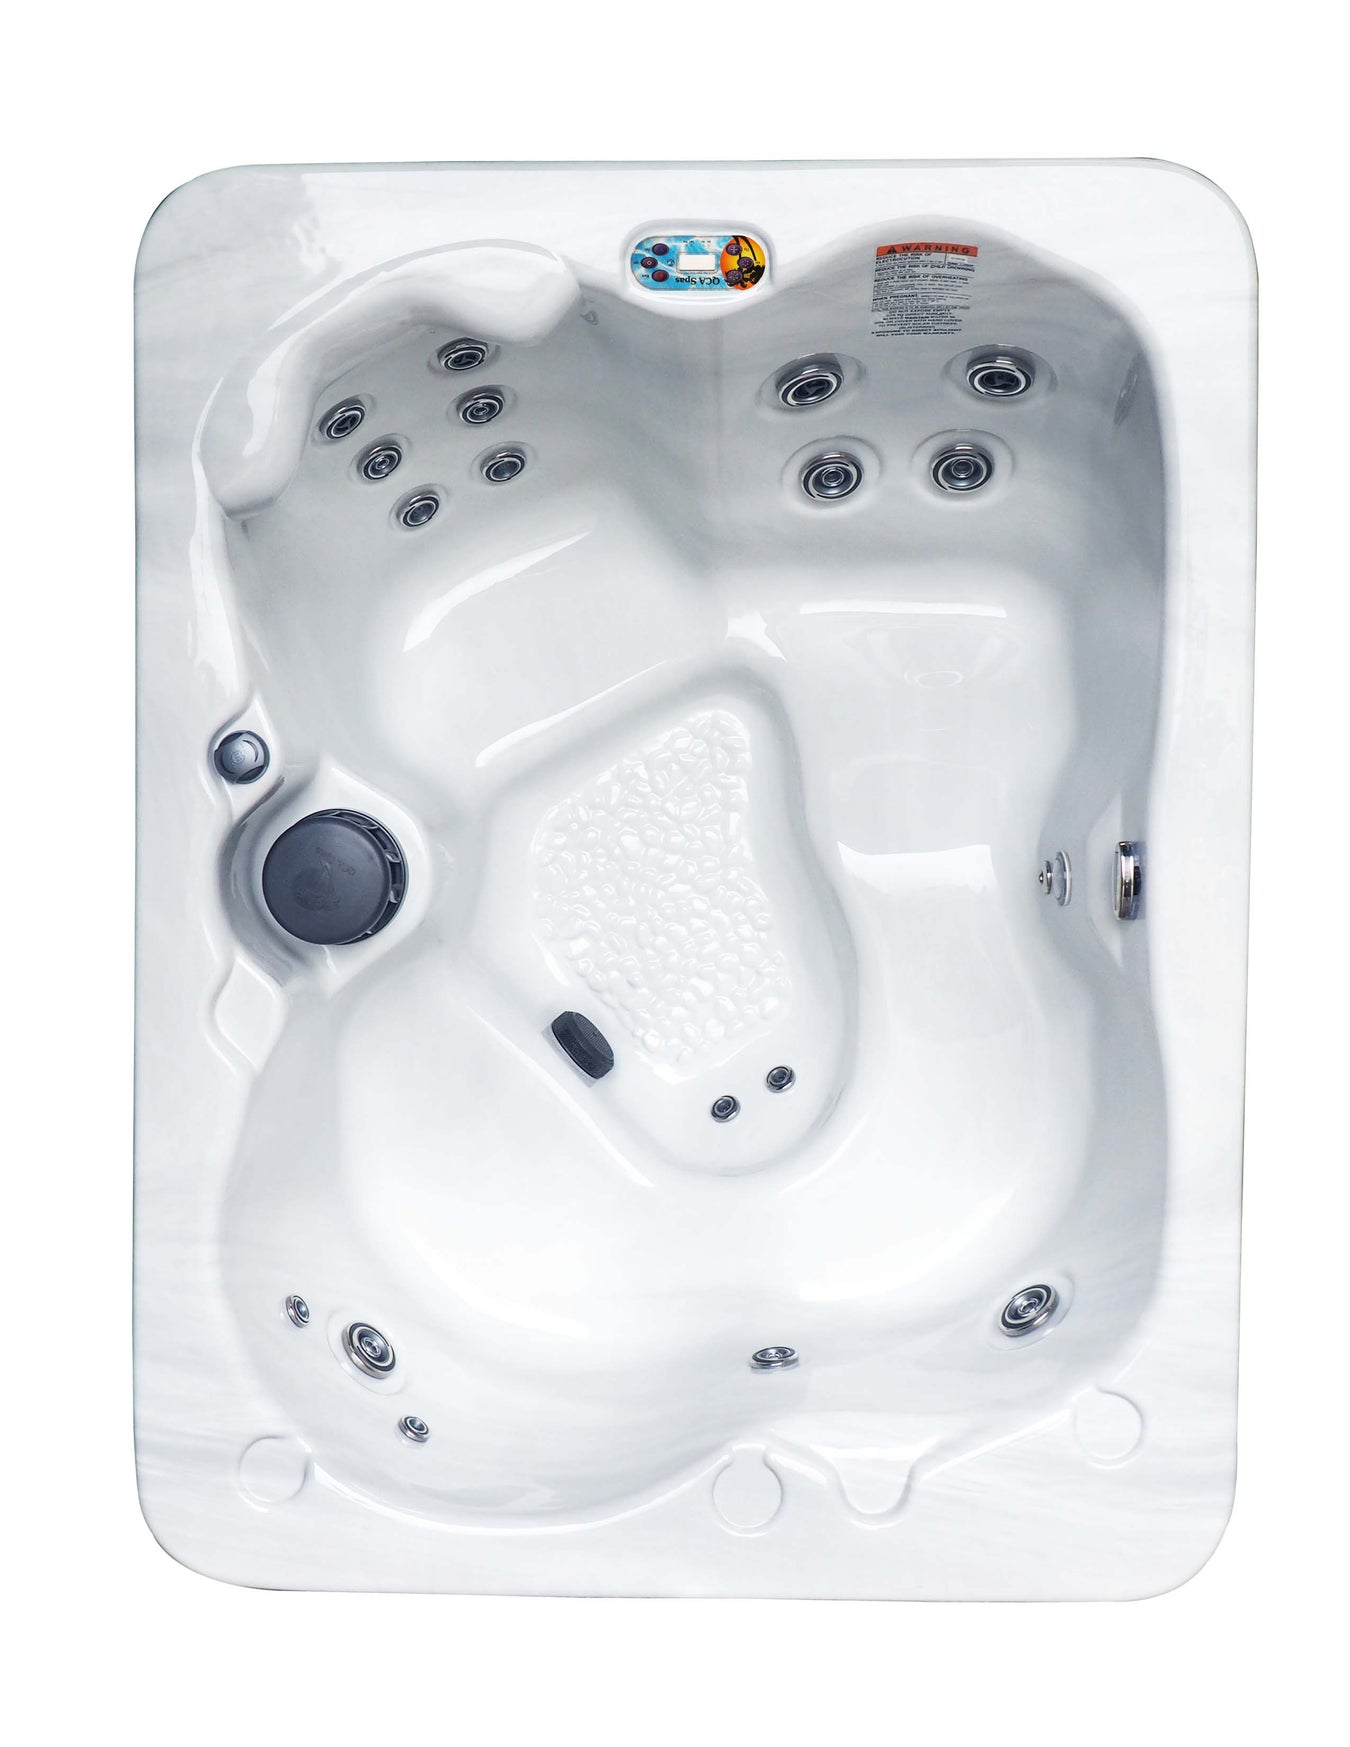 3 Person Hot Tubs